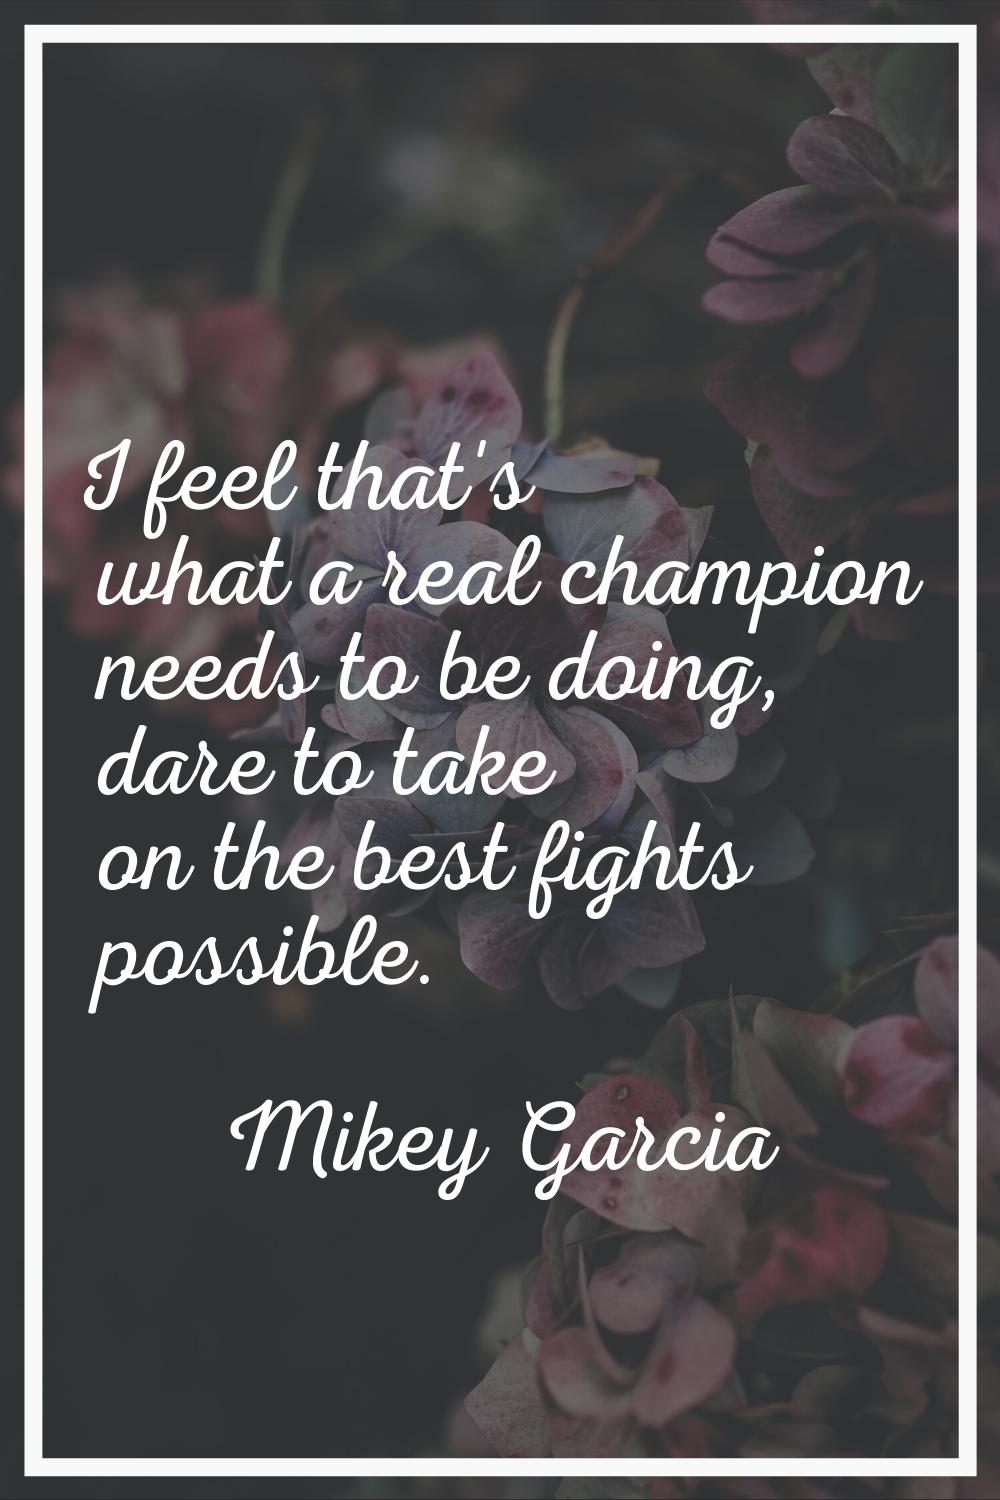 I feel that's what a real champion needs to be doing, dare to take on the best fights possible.